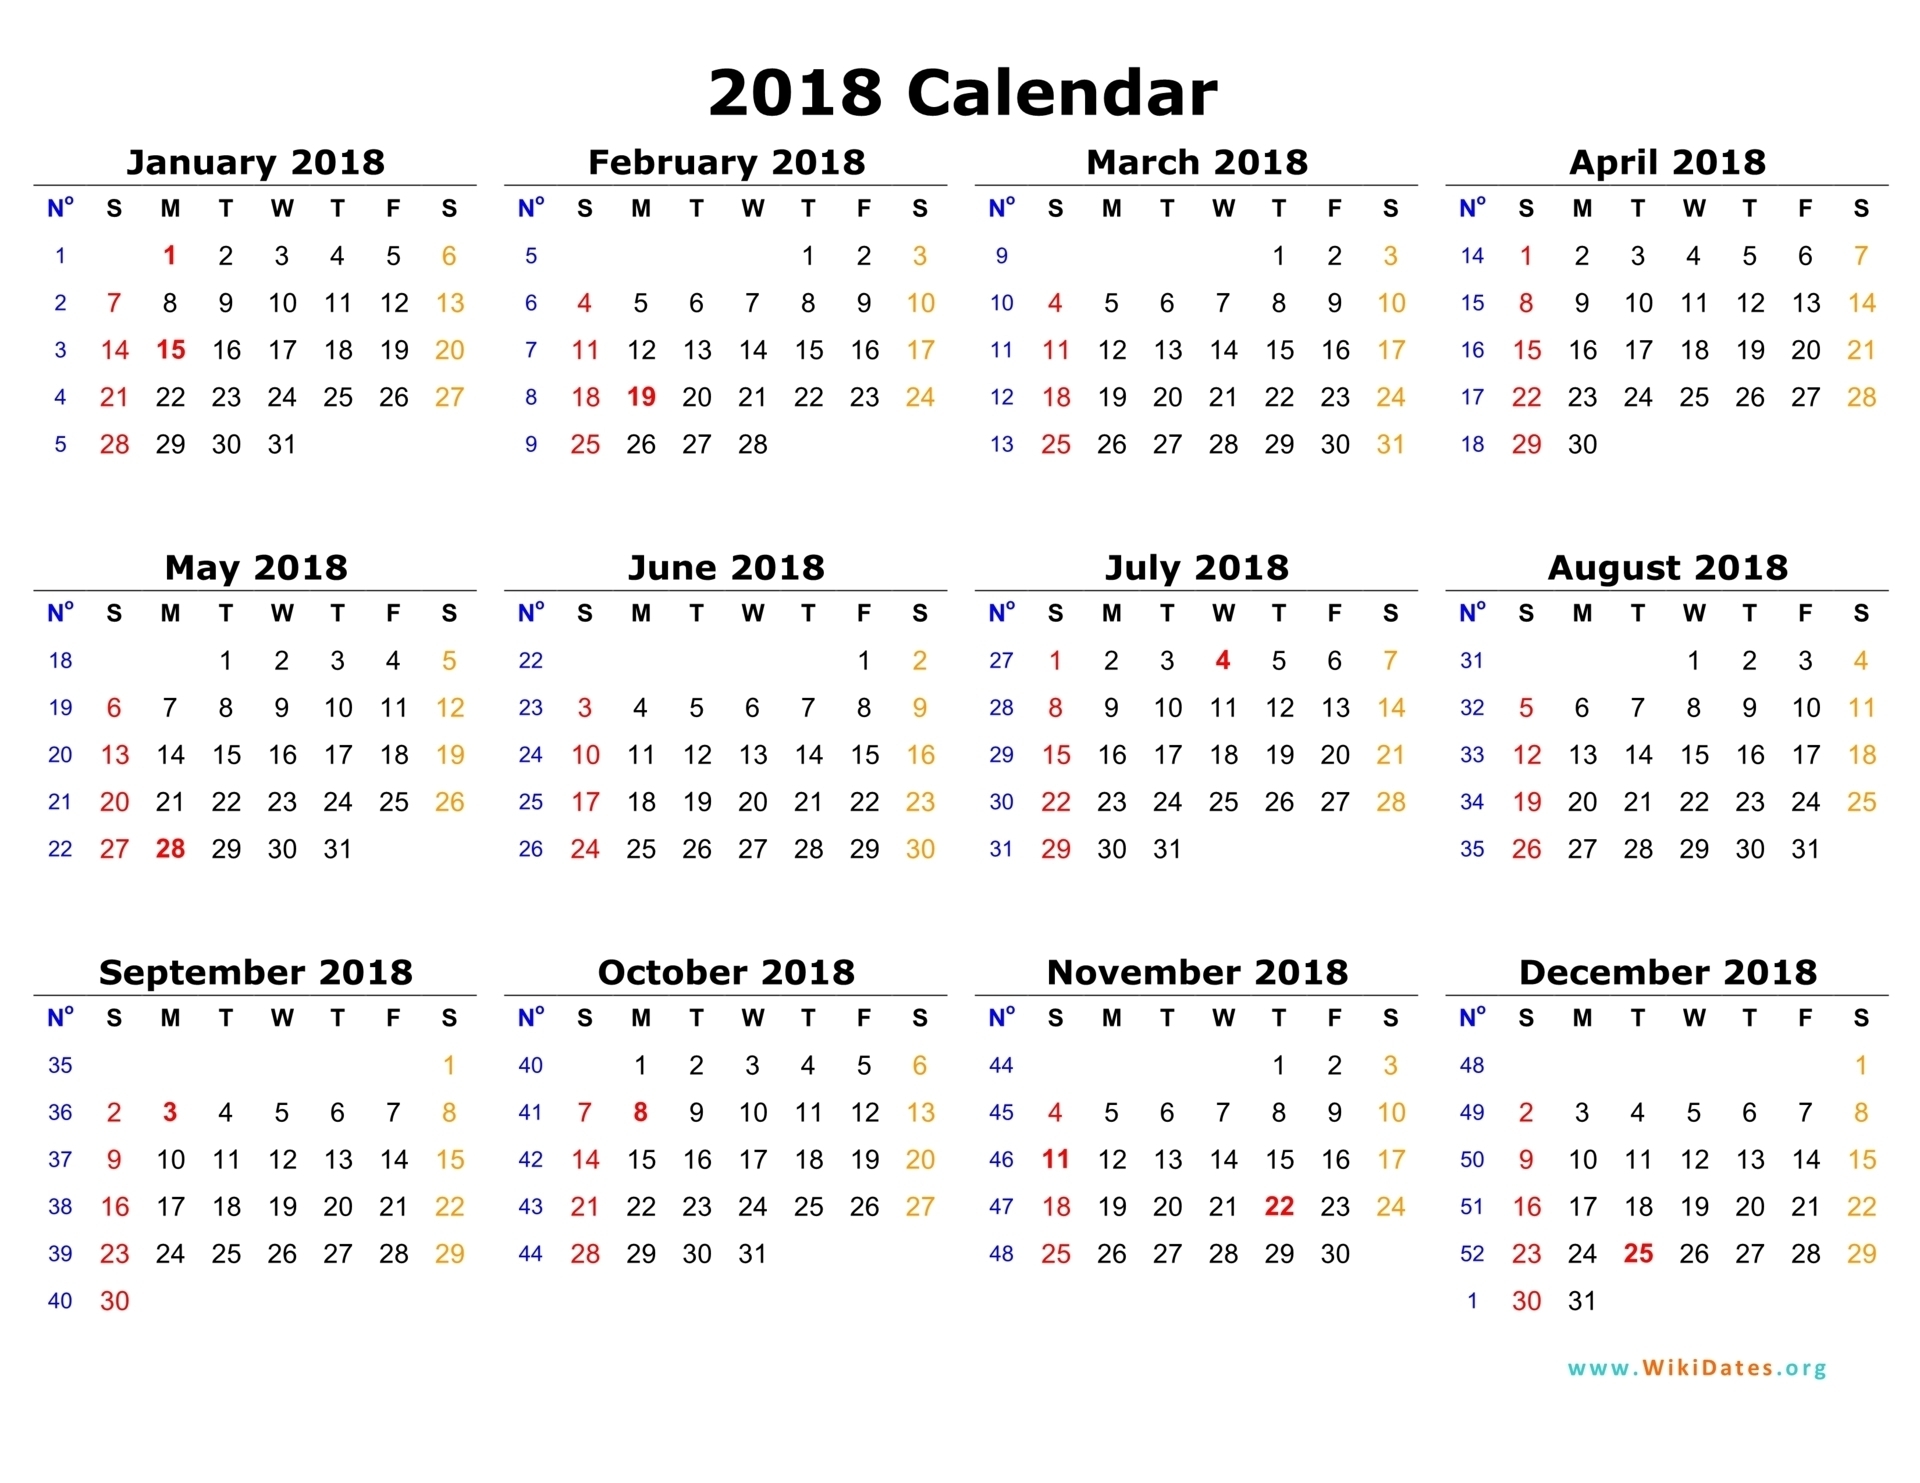 2018 Calendar One Page | Printable Calendar Template within Year Calendar One Page To Print